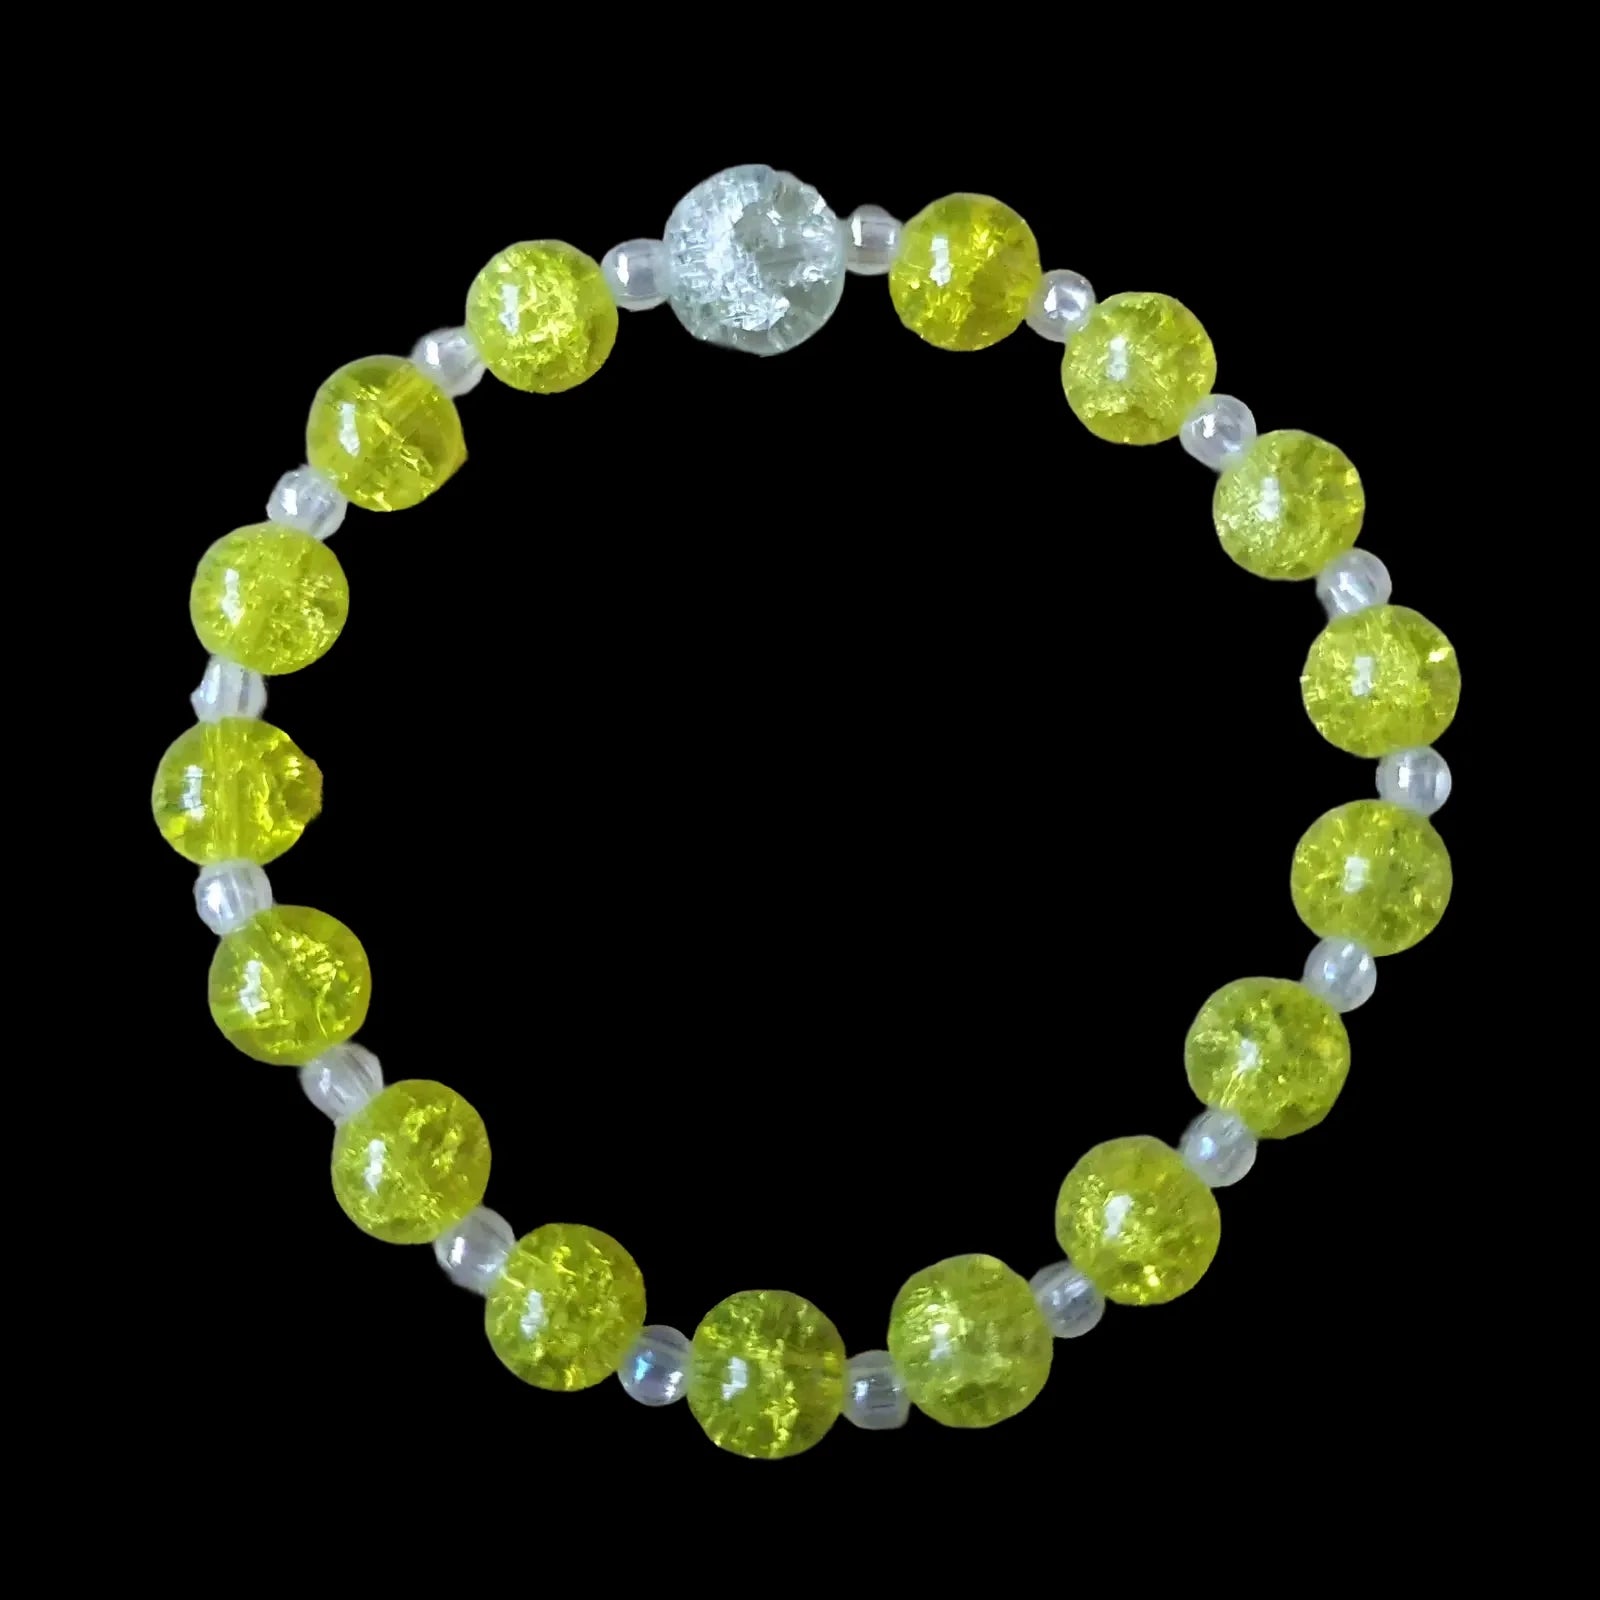 Unique Handmade Crafted Beaded Bracelet Yellow Gift